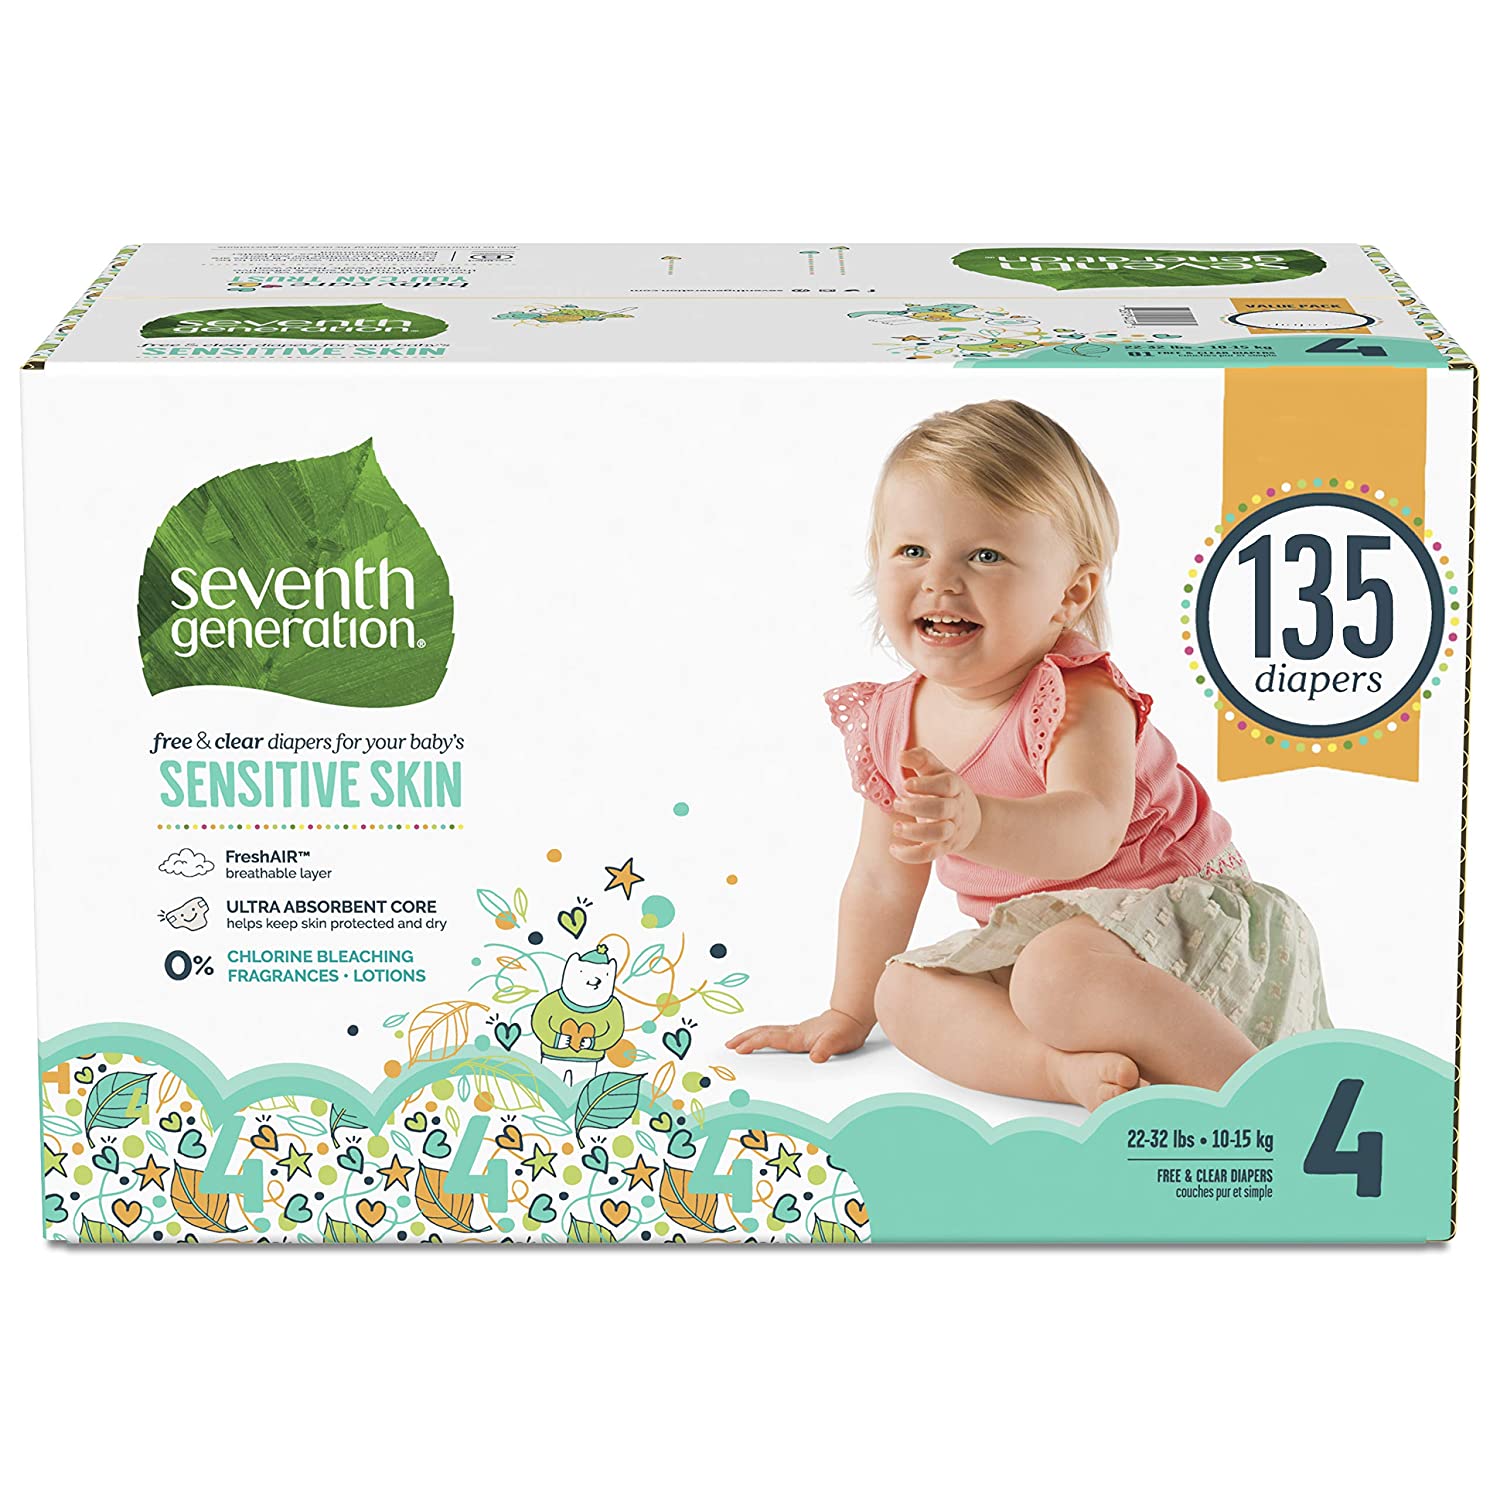 Top 7 Best Natural Disposable Diapers Reviews in 2022 2